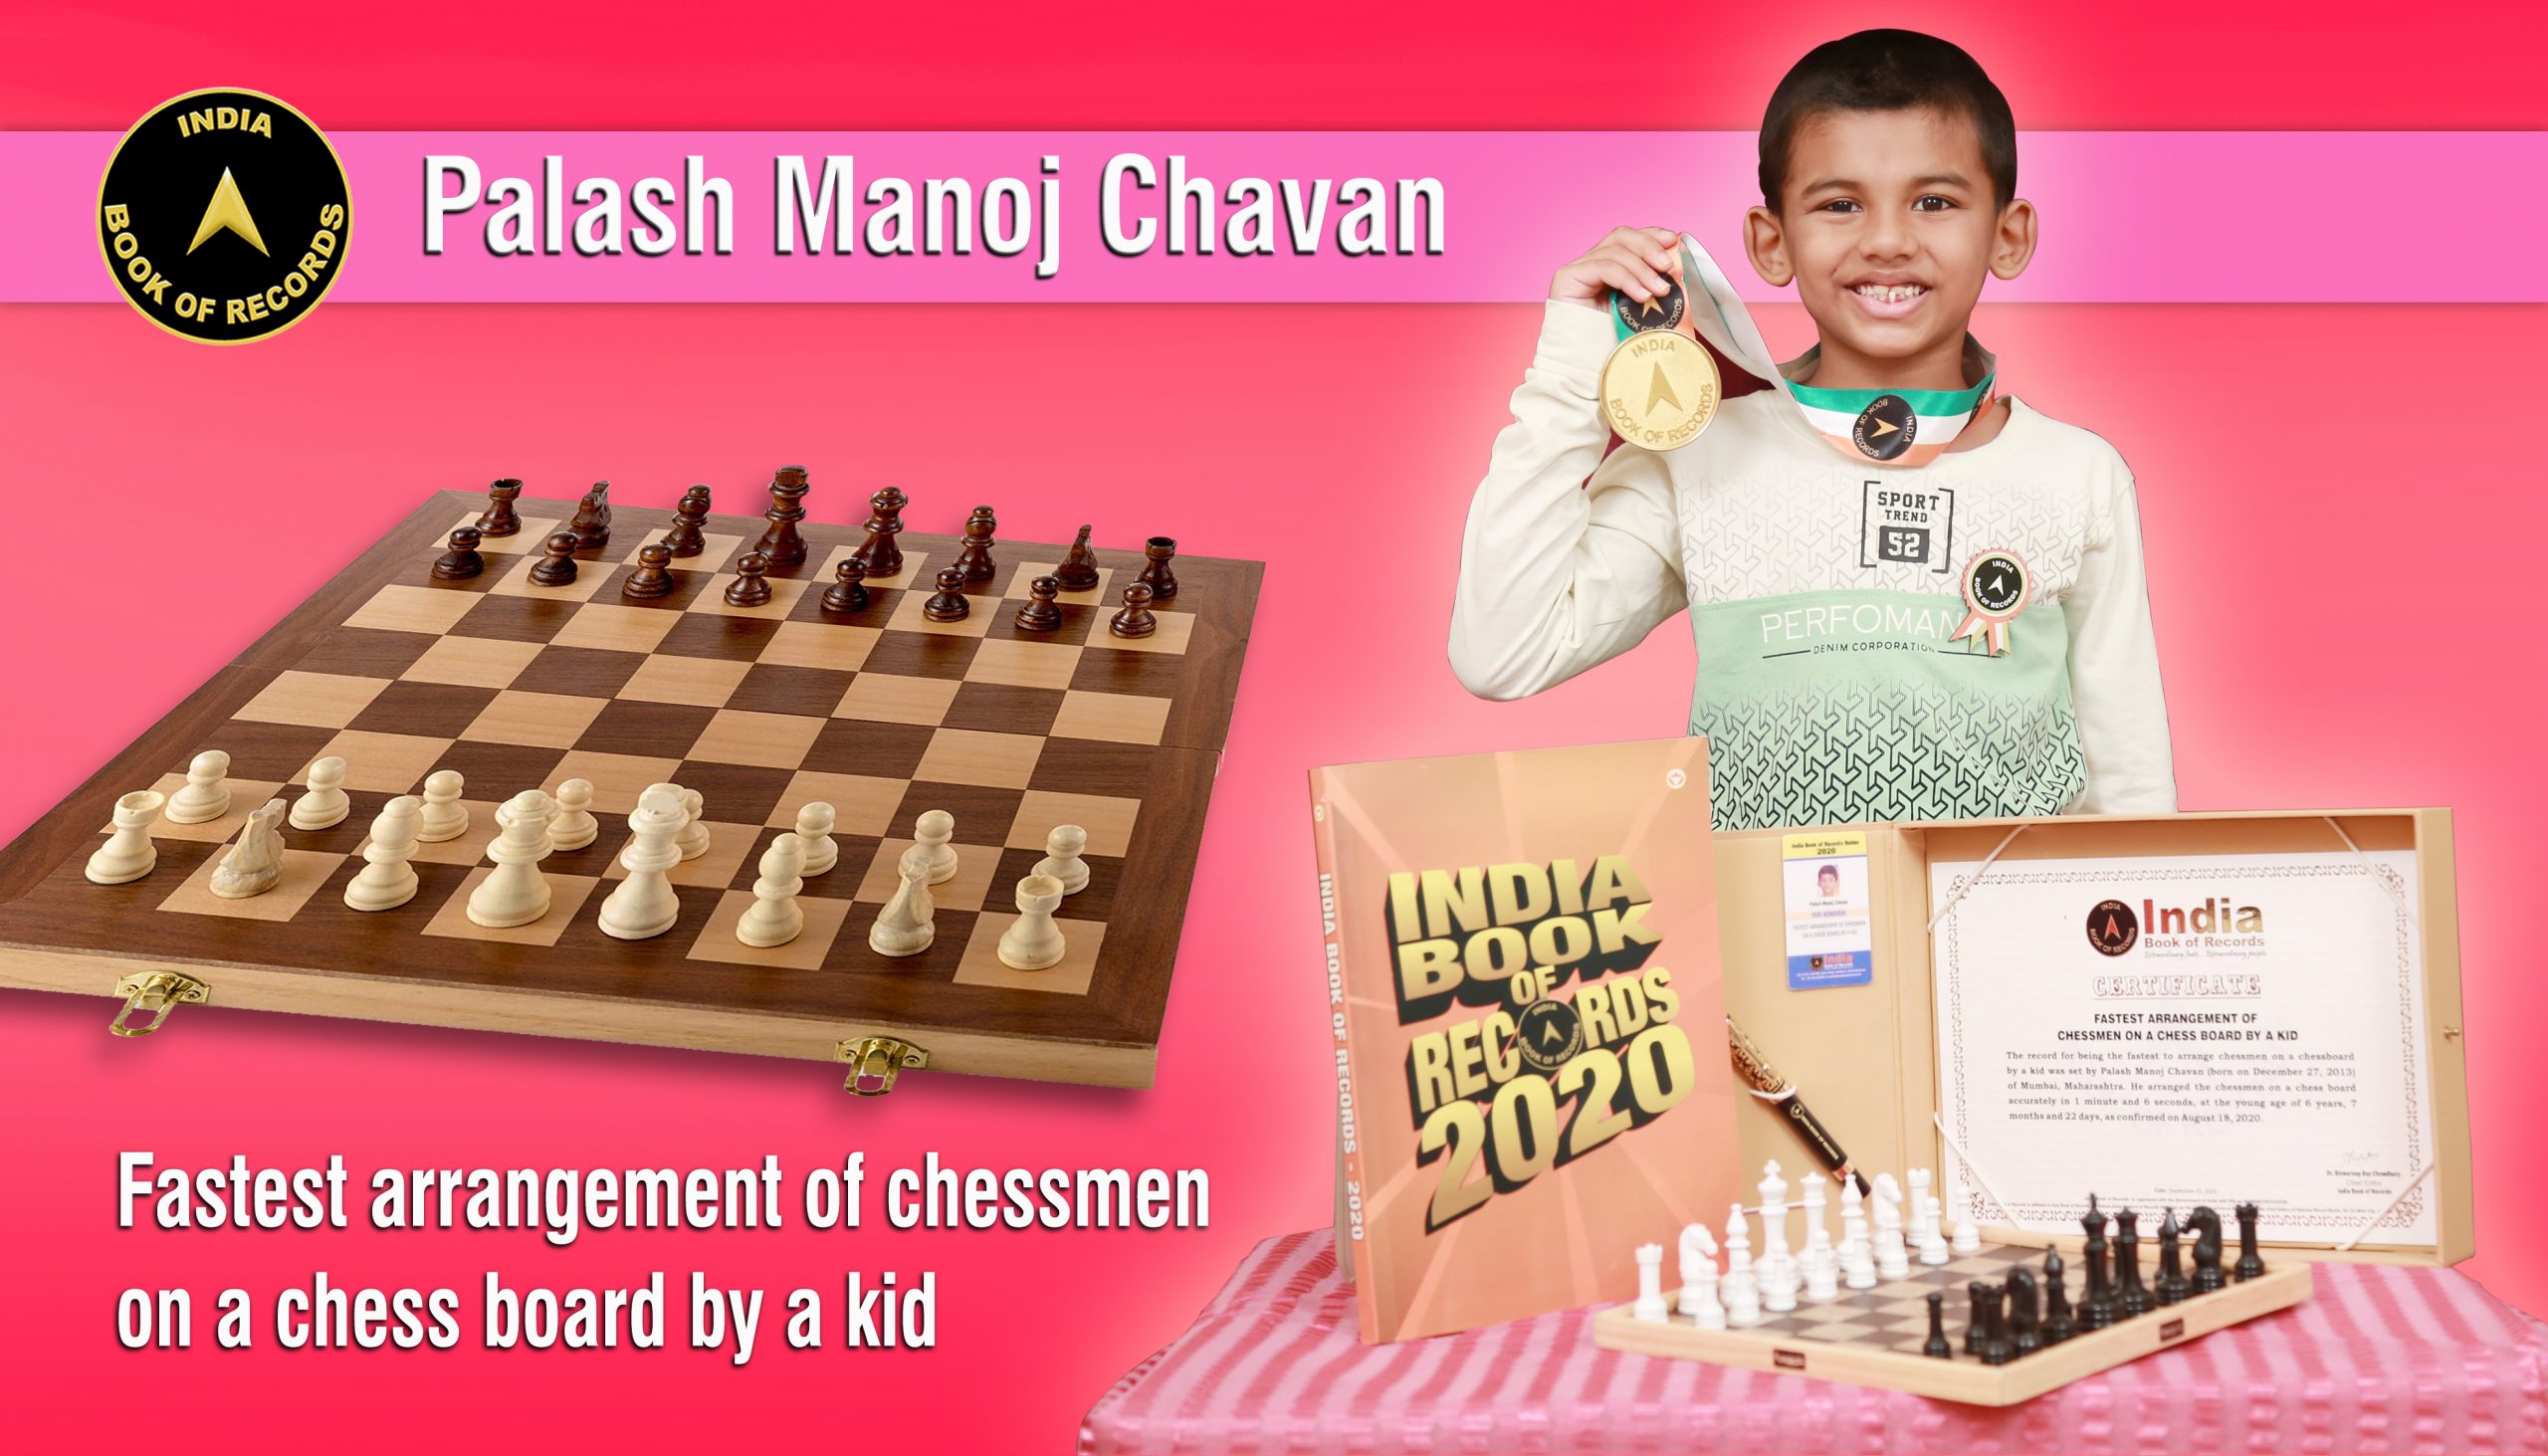 FASTEST ARRANGEMENT OF CHESSMEN ON A CHESS BOARD BY A KID - IBR